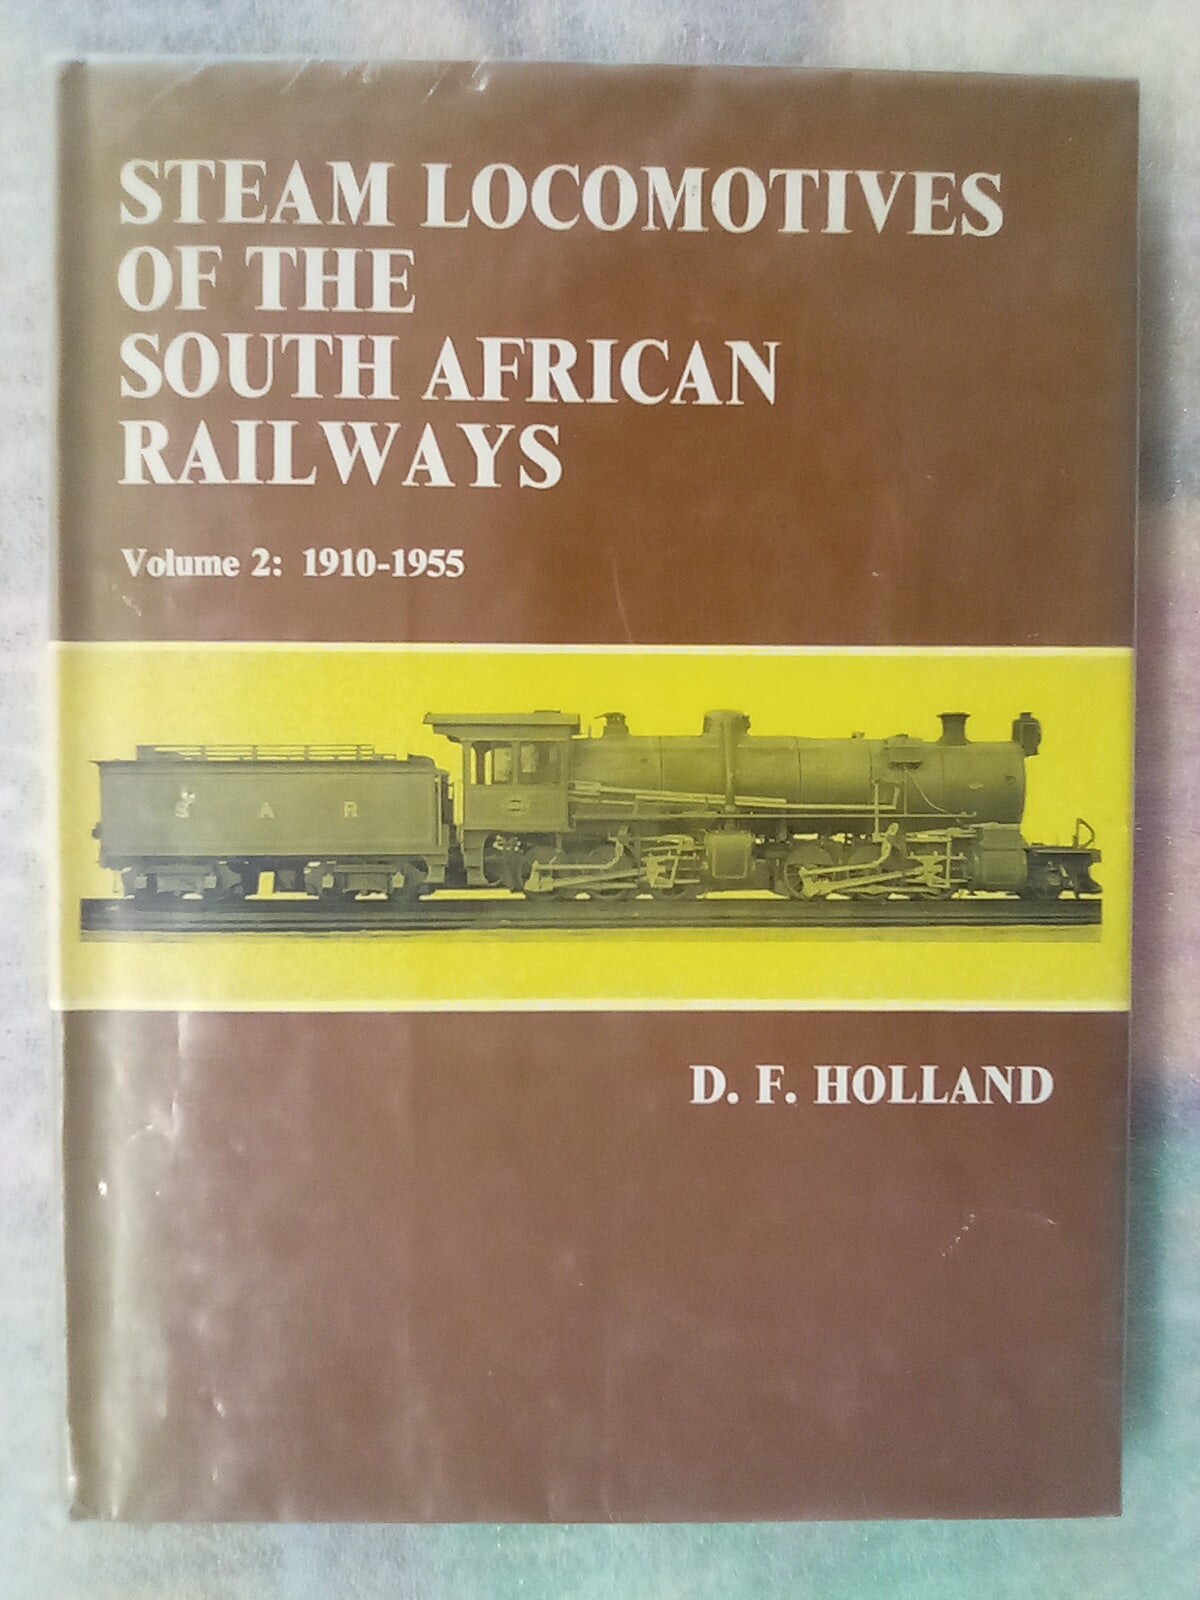 Steam Locomotives of the South African Railways - Volumes 1 & 2